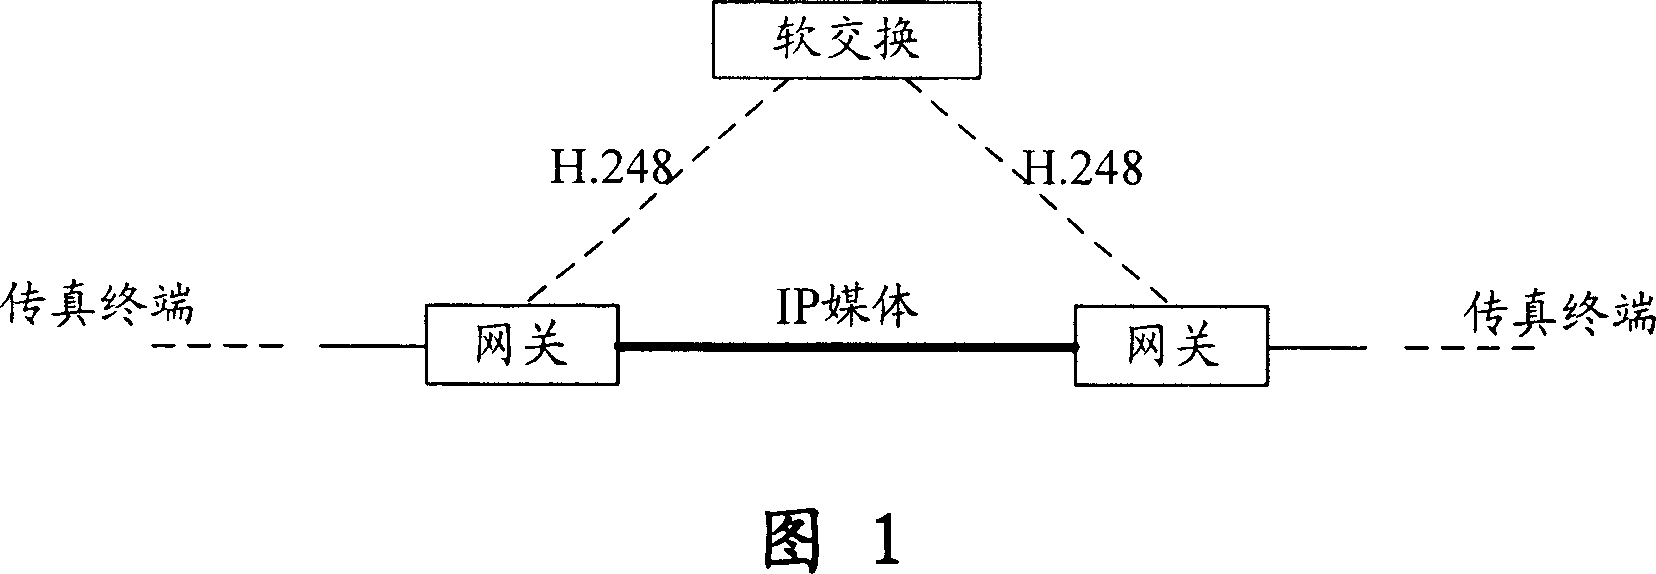 Implementation method of high-speed fax signaling flow supported by the media capability negotiation